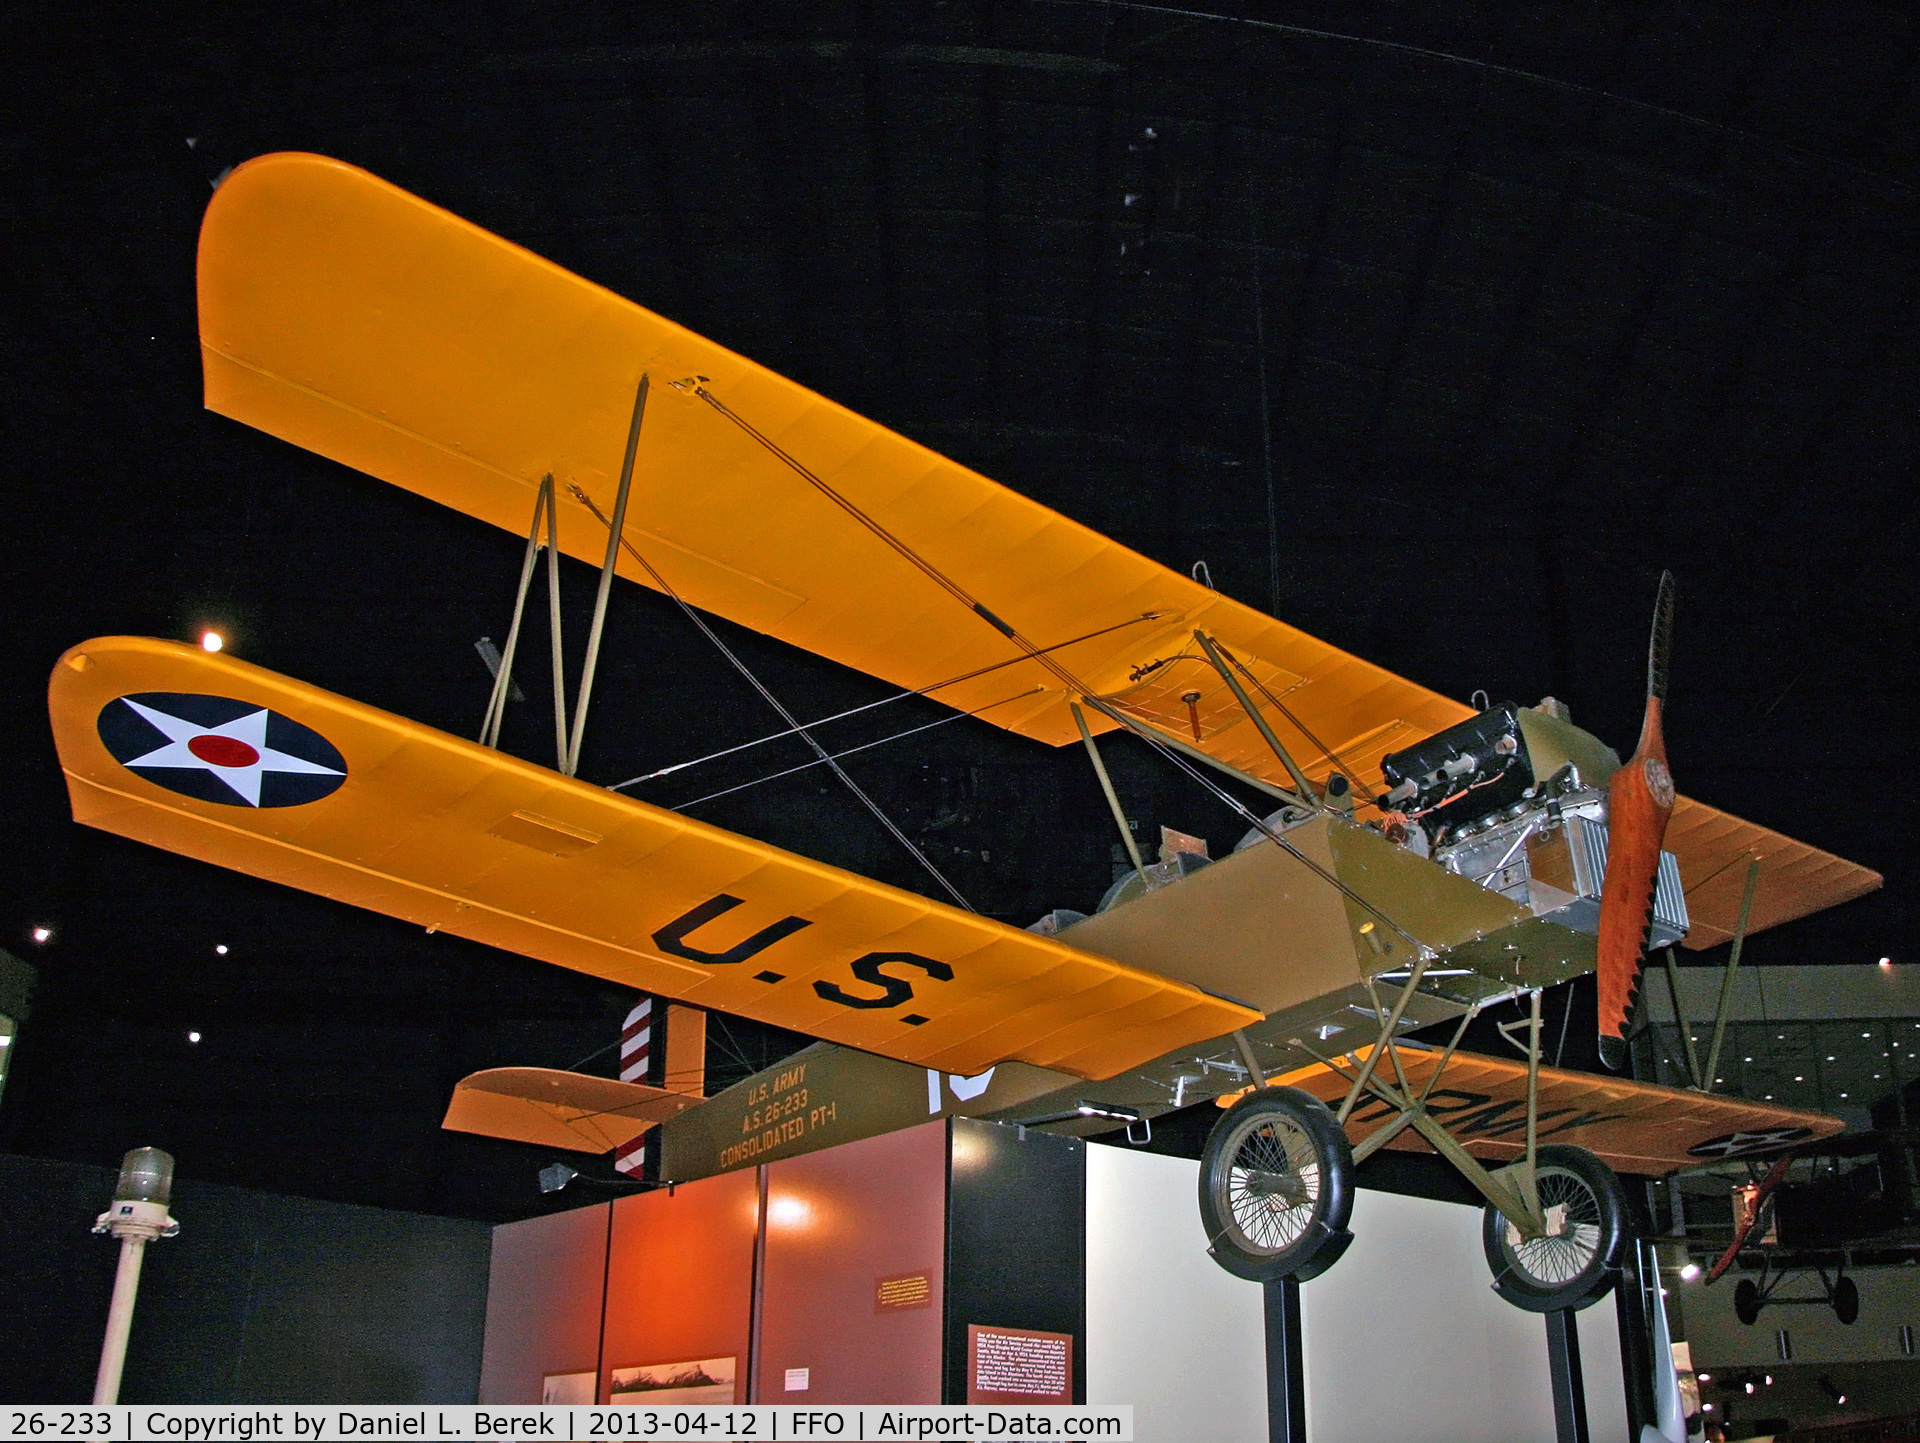 26-233, 1926 Consolidated PT-1 Trusty C/N Not found 26-0233, This faithful trainer has been restored and preserved at the USAF Museum in Dayton.